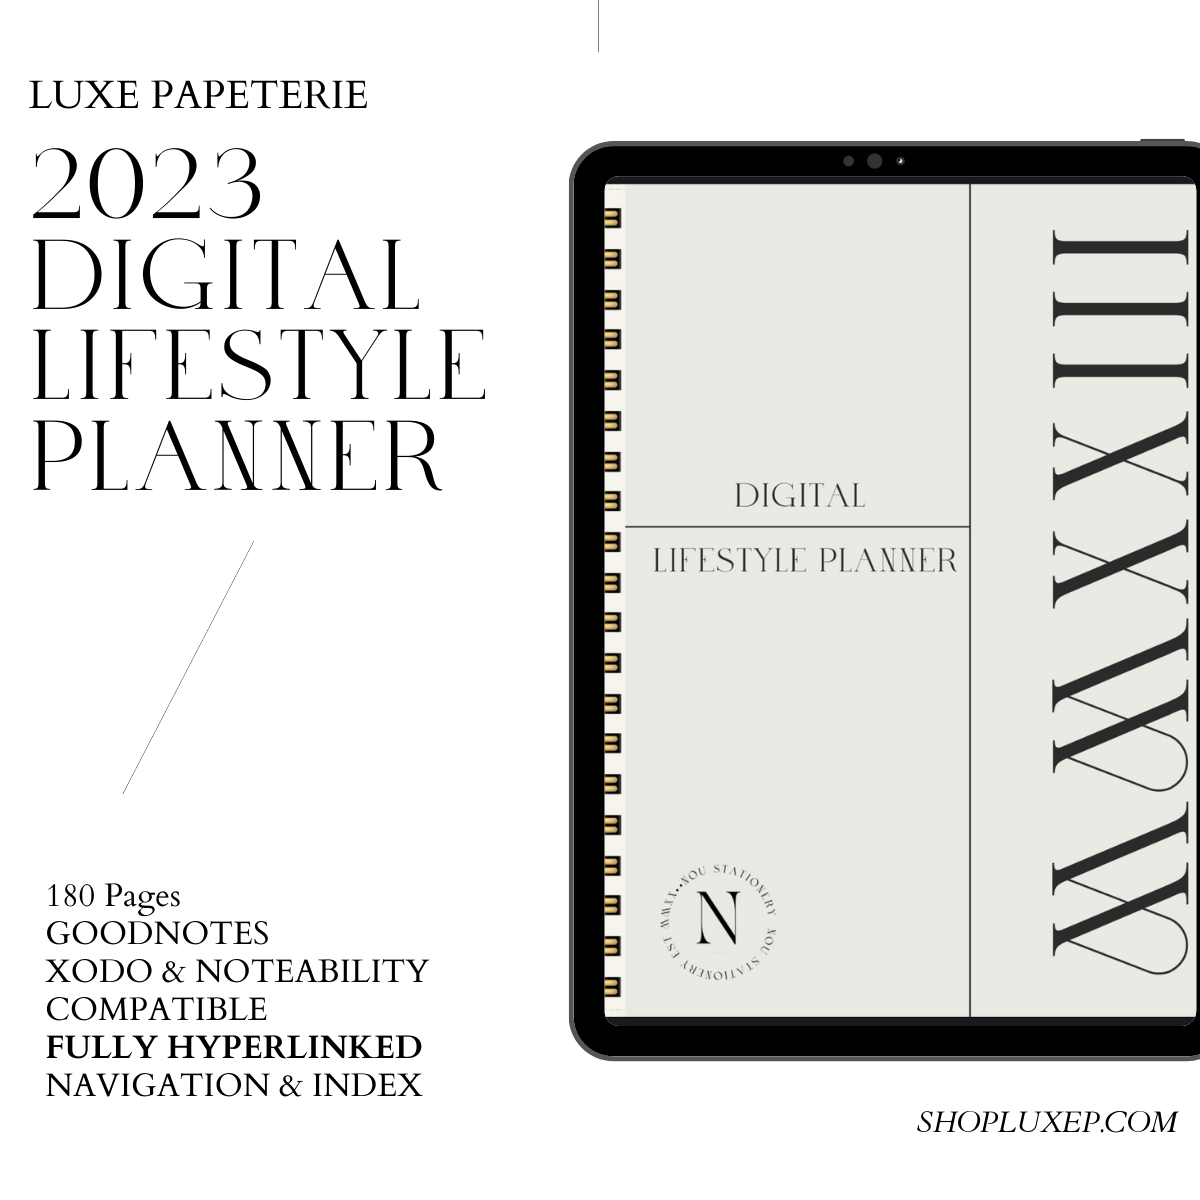 2023 Minimalist Digital Lifestyle Planner - Goodnotes 2023 planner - Noteability planner - 2023 ipad planner - 2023 Digital lifestyle planner - 2023 weekly planner - 2023 health tracker and planner 